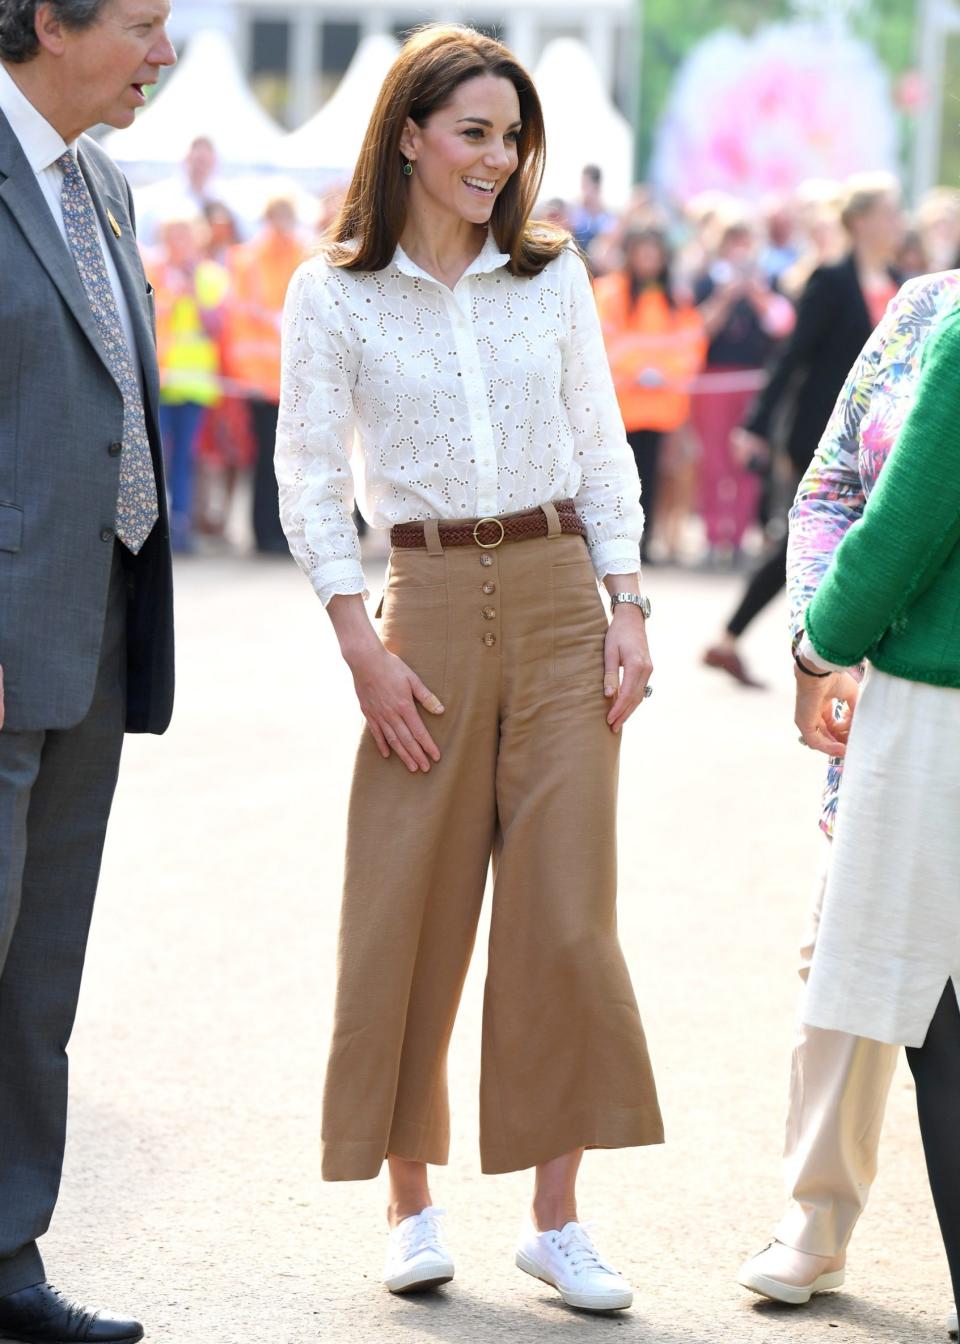 At RHS Chelsea in 2019 in a broderie anglaise blouse, Massimo Dutti culottes and box-fresh Superga plimsolls - Karwai Tang